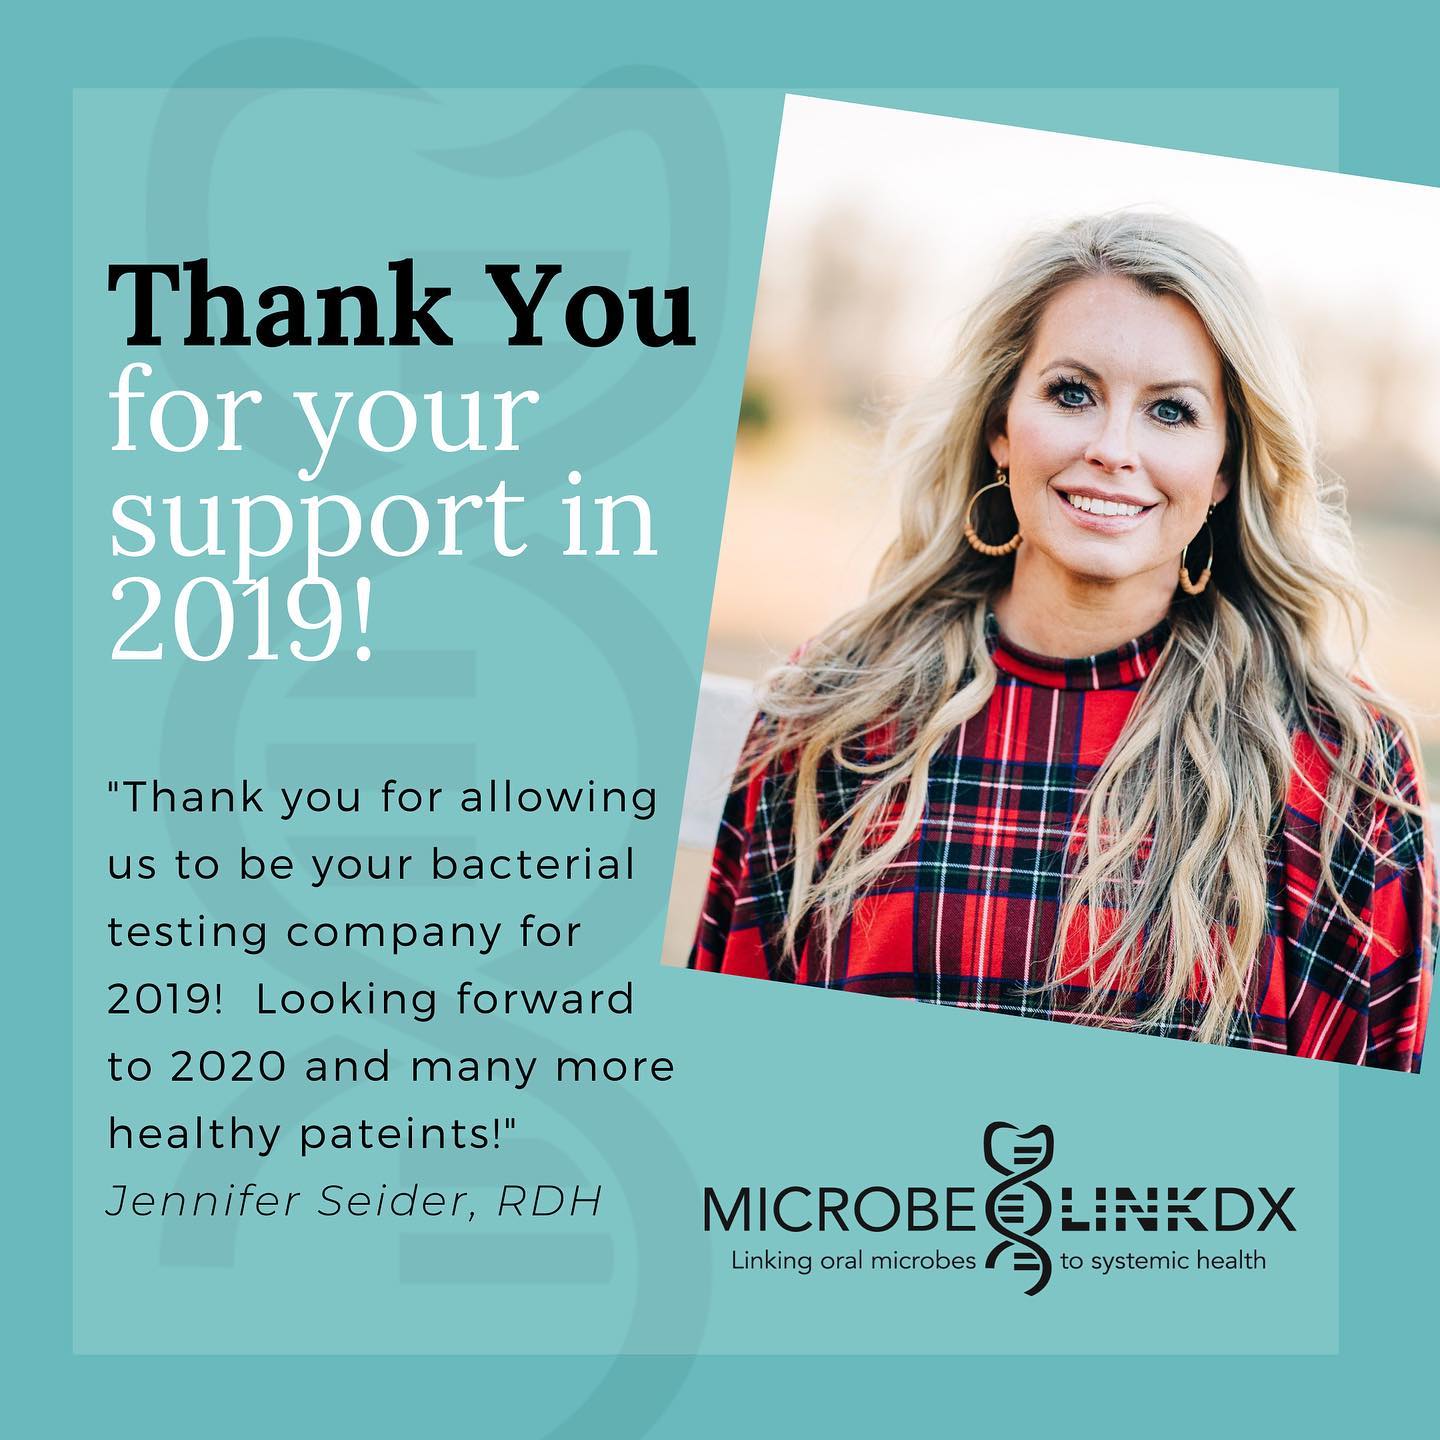 Thank You for your support in 2019!